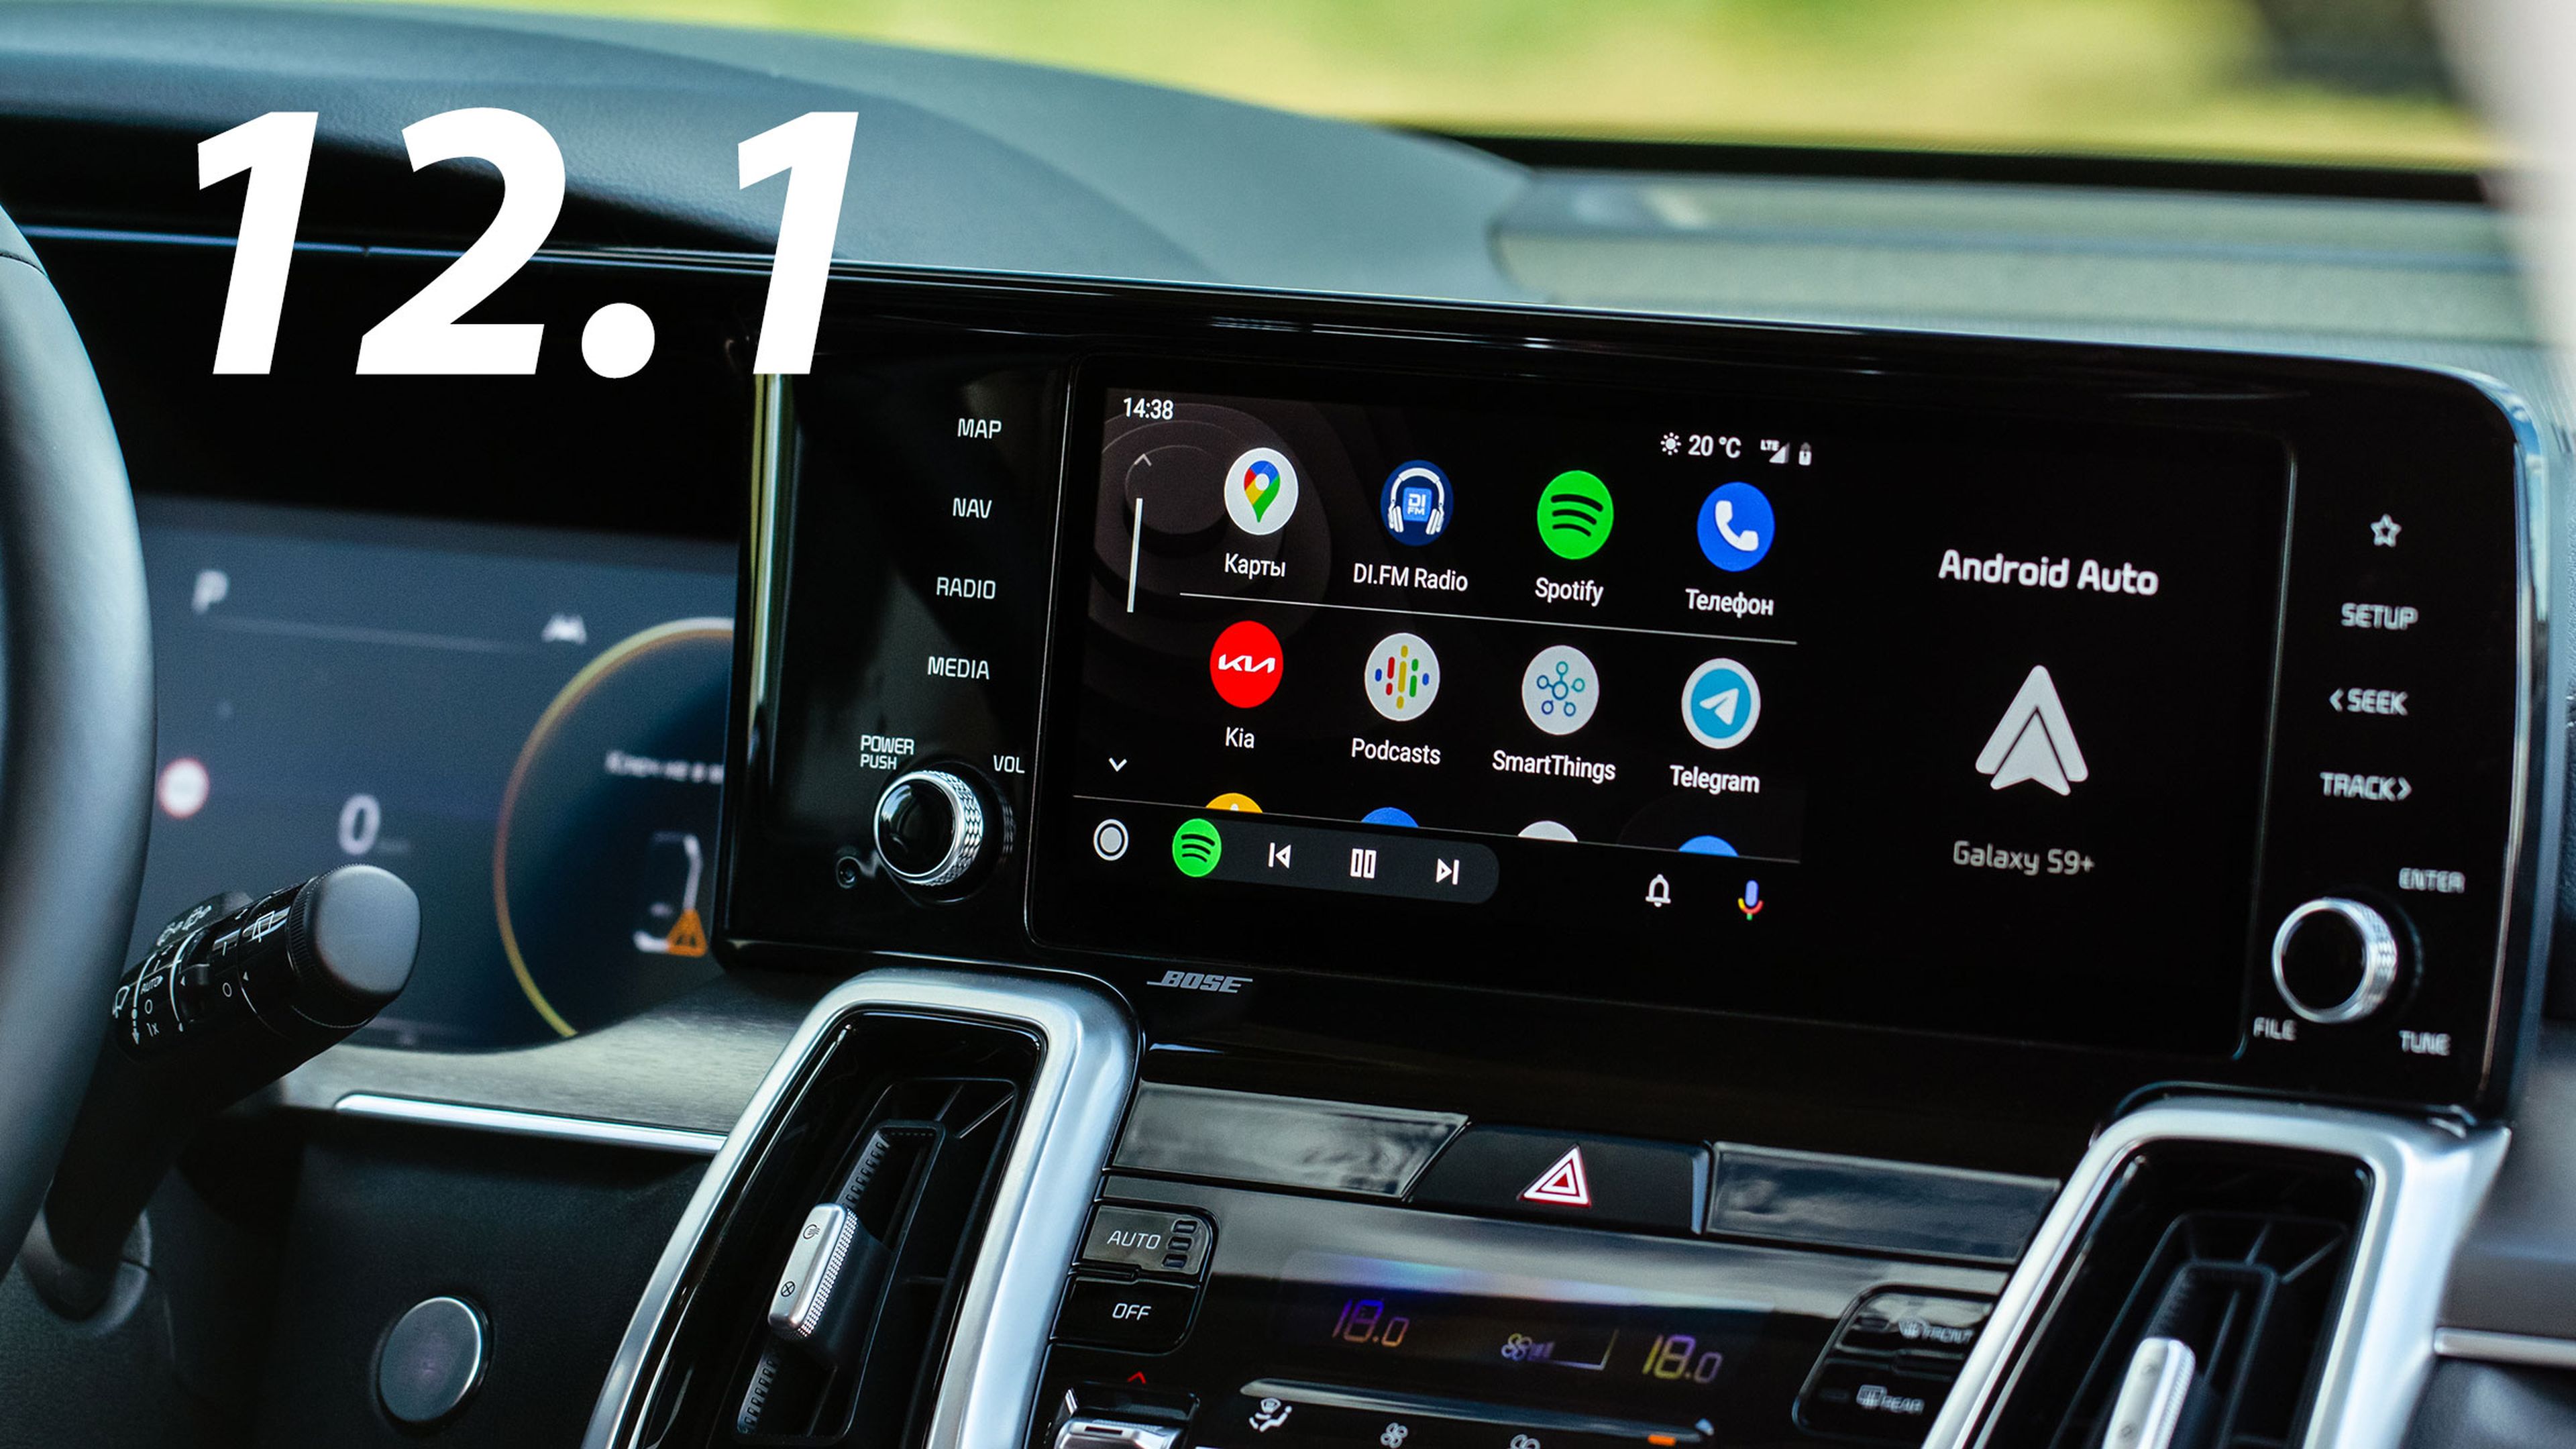 Android Auto 12.1